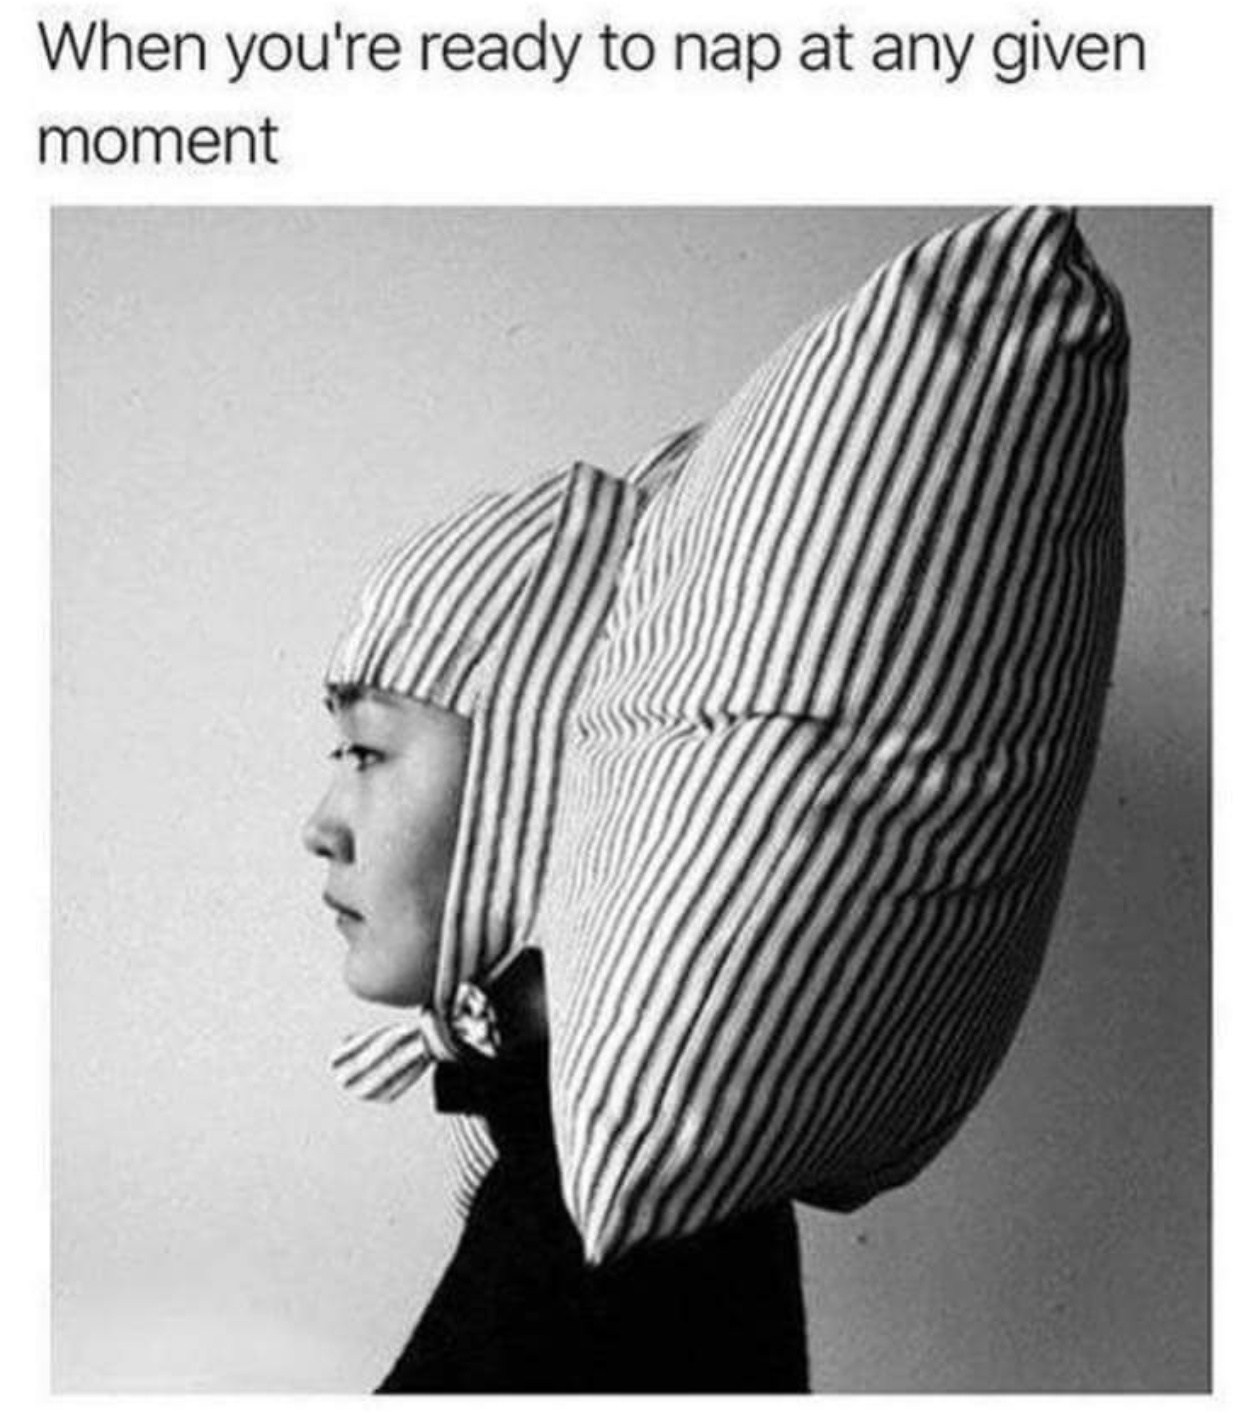 meme - pillow wig - When you're ready to nap at any given moment